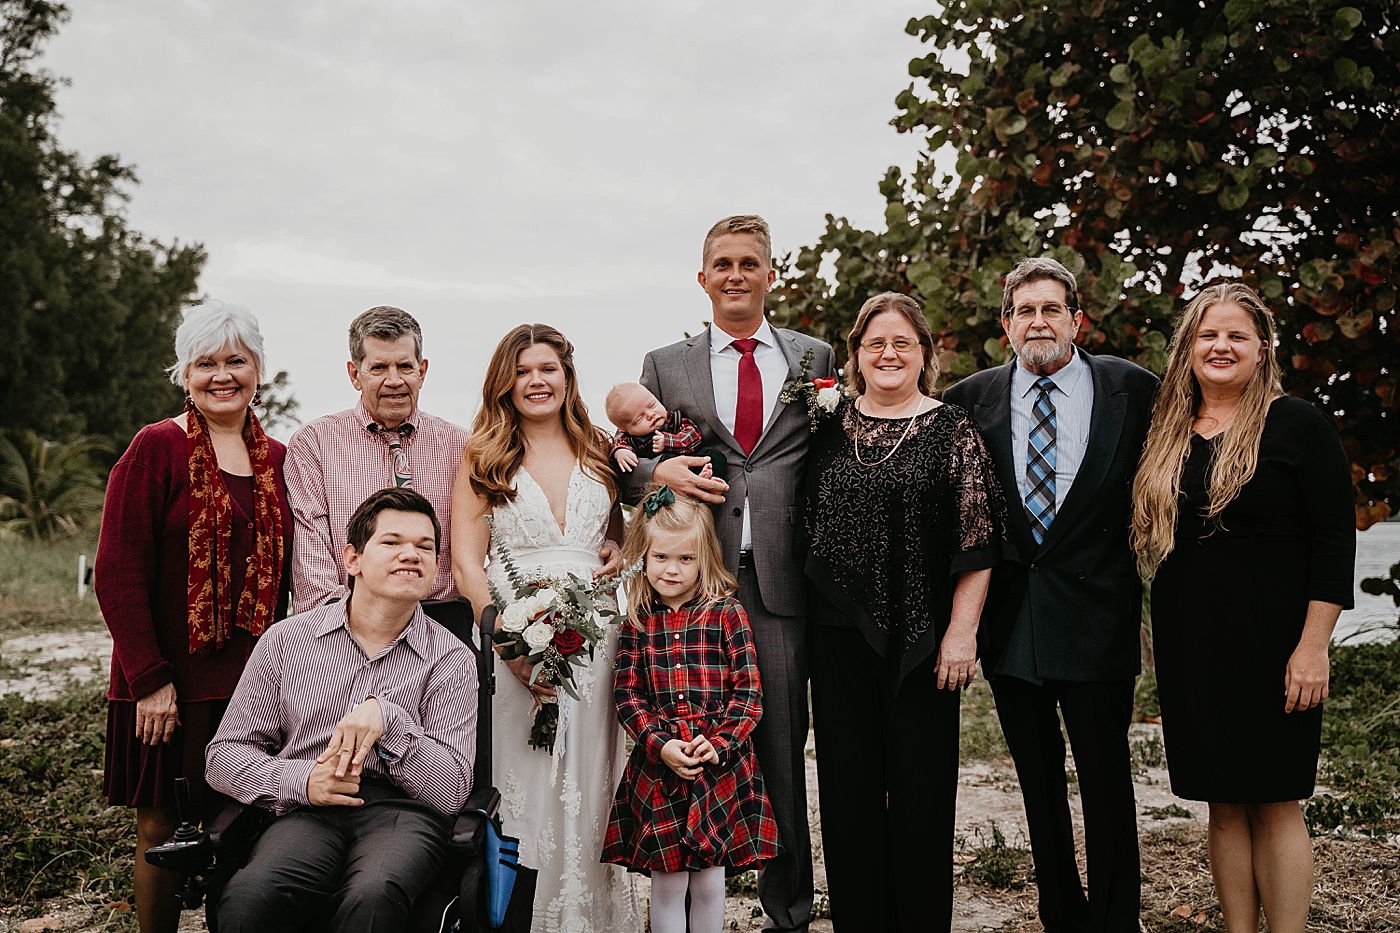 Family portrait South Florida Elopement Photography captured by Krystal Capone Photography